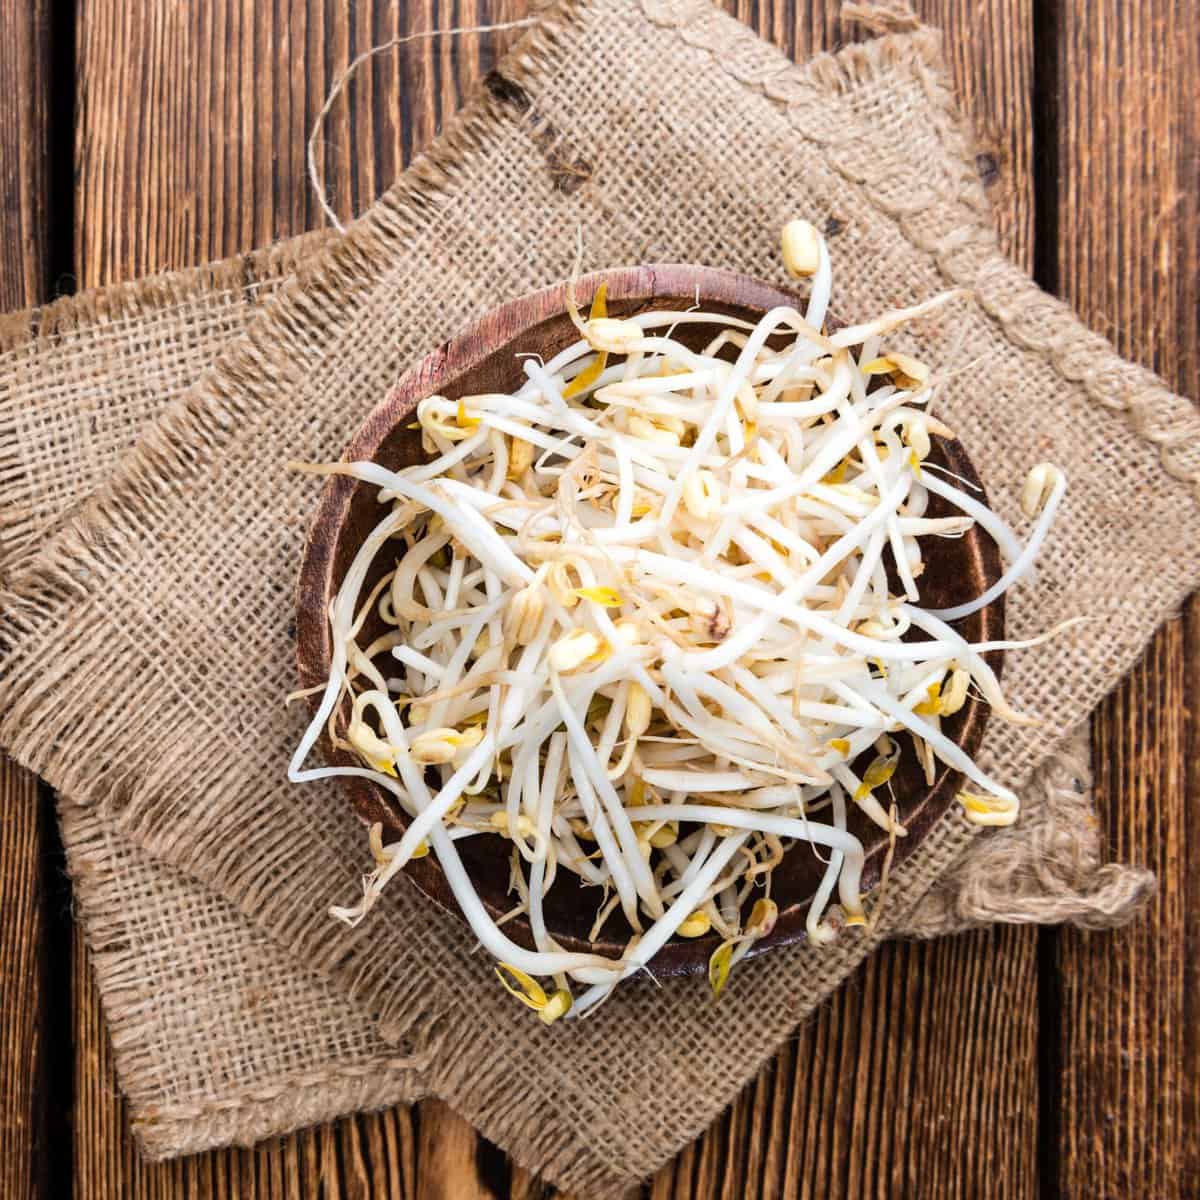 Wooden bowl filled with mung bean sprouts.